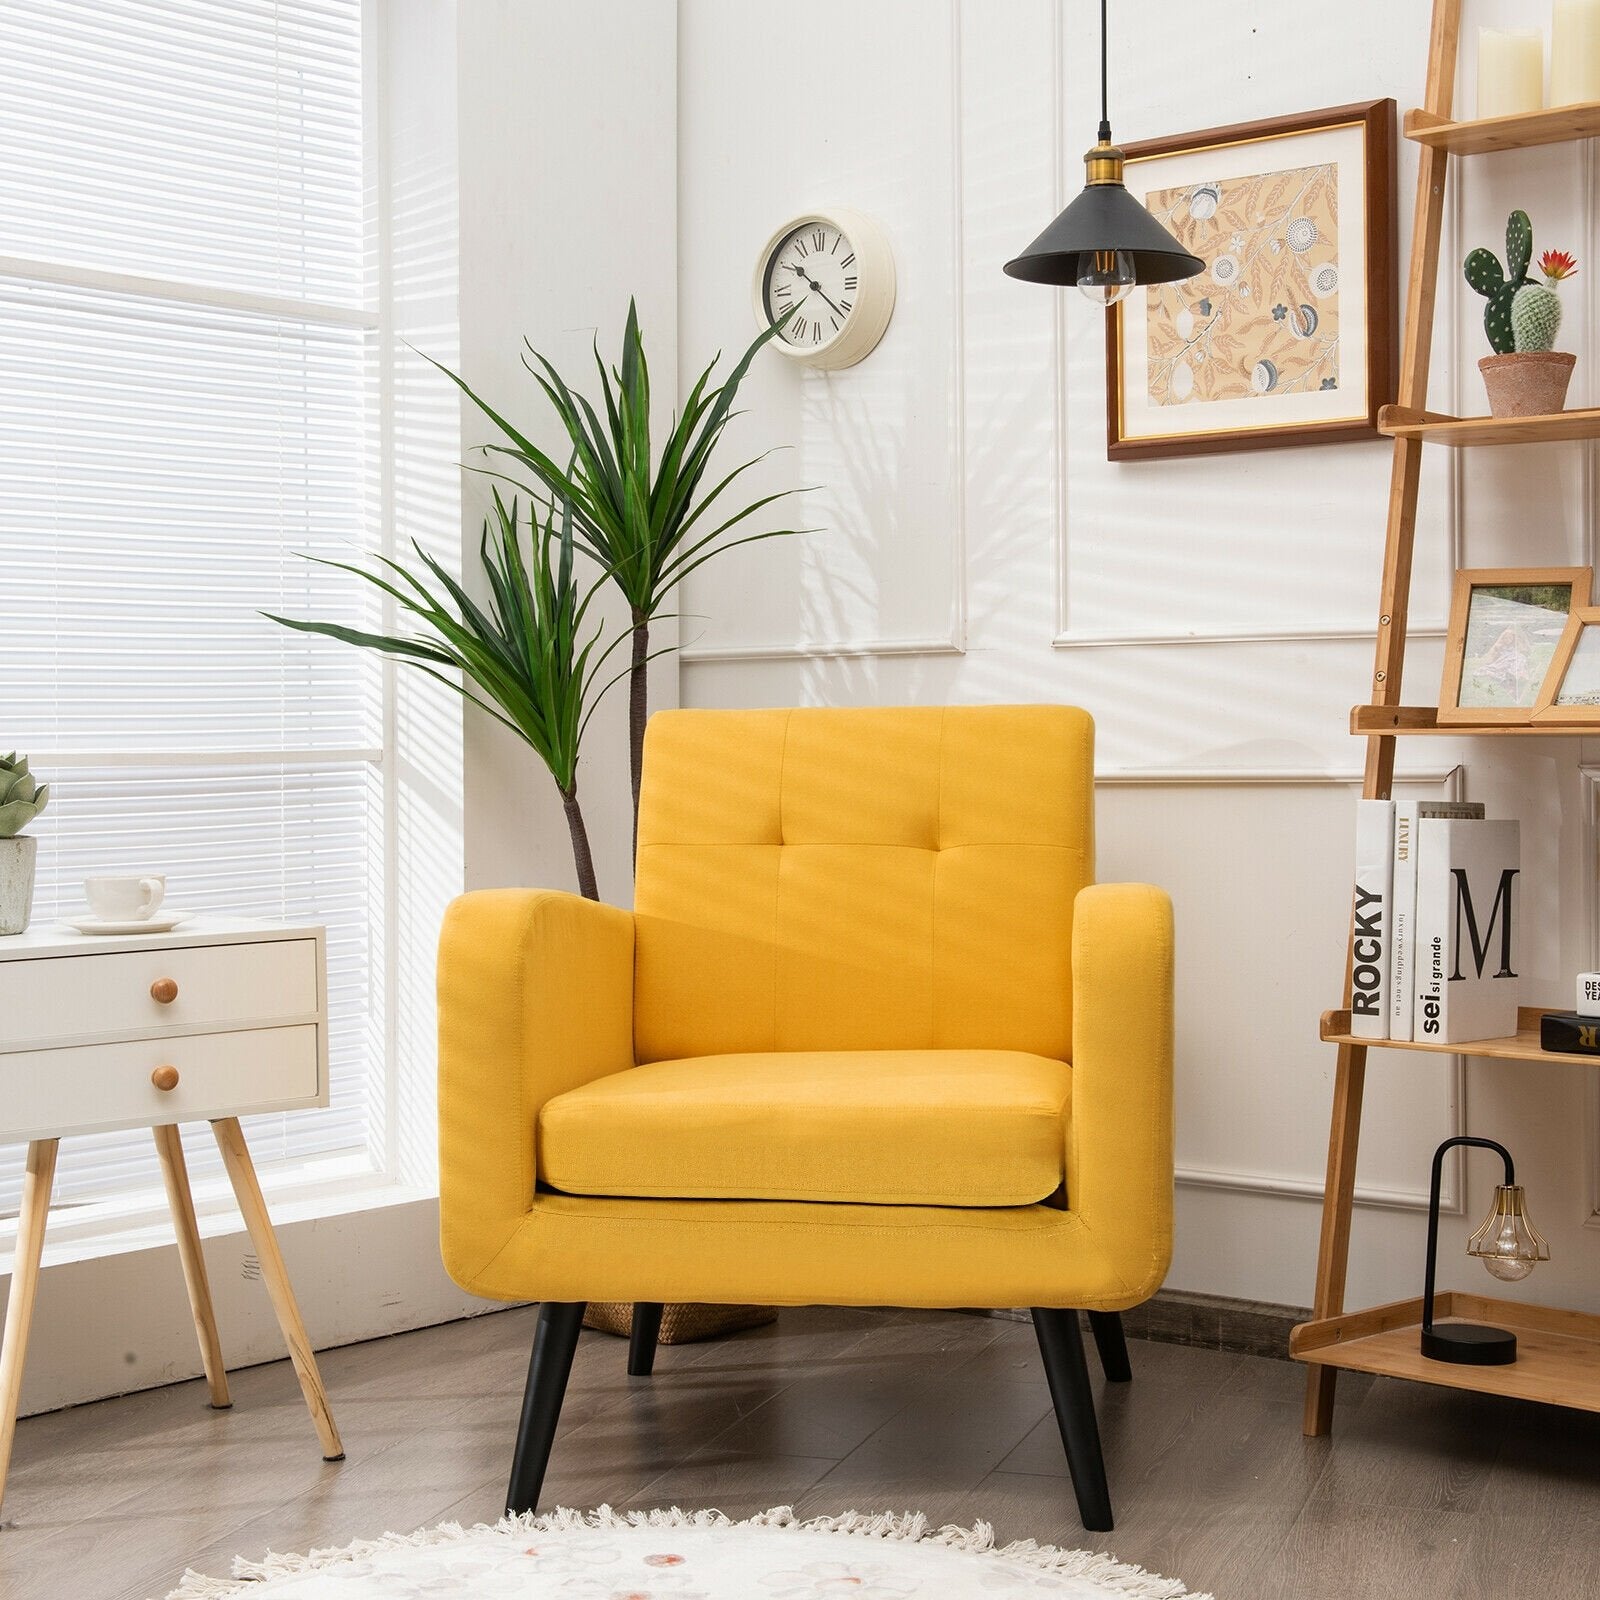 Modern Upholstered Comfy Accent Chair Single Sofa with Rubber Wood Legs, Yellow - Gallery Canada